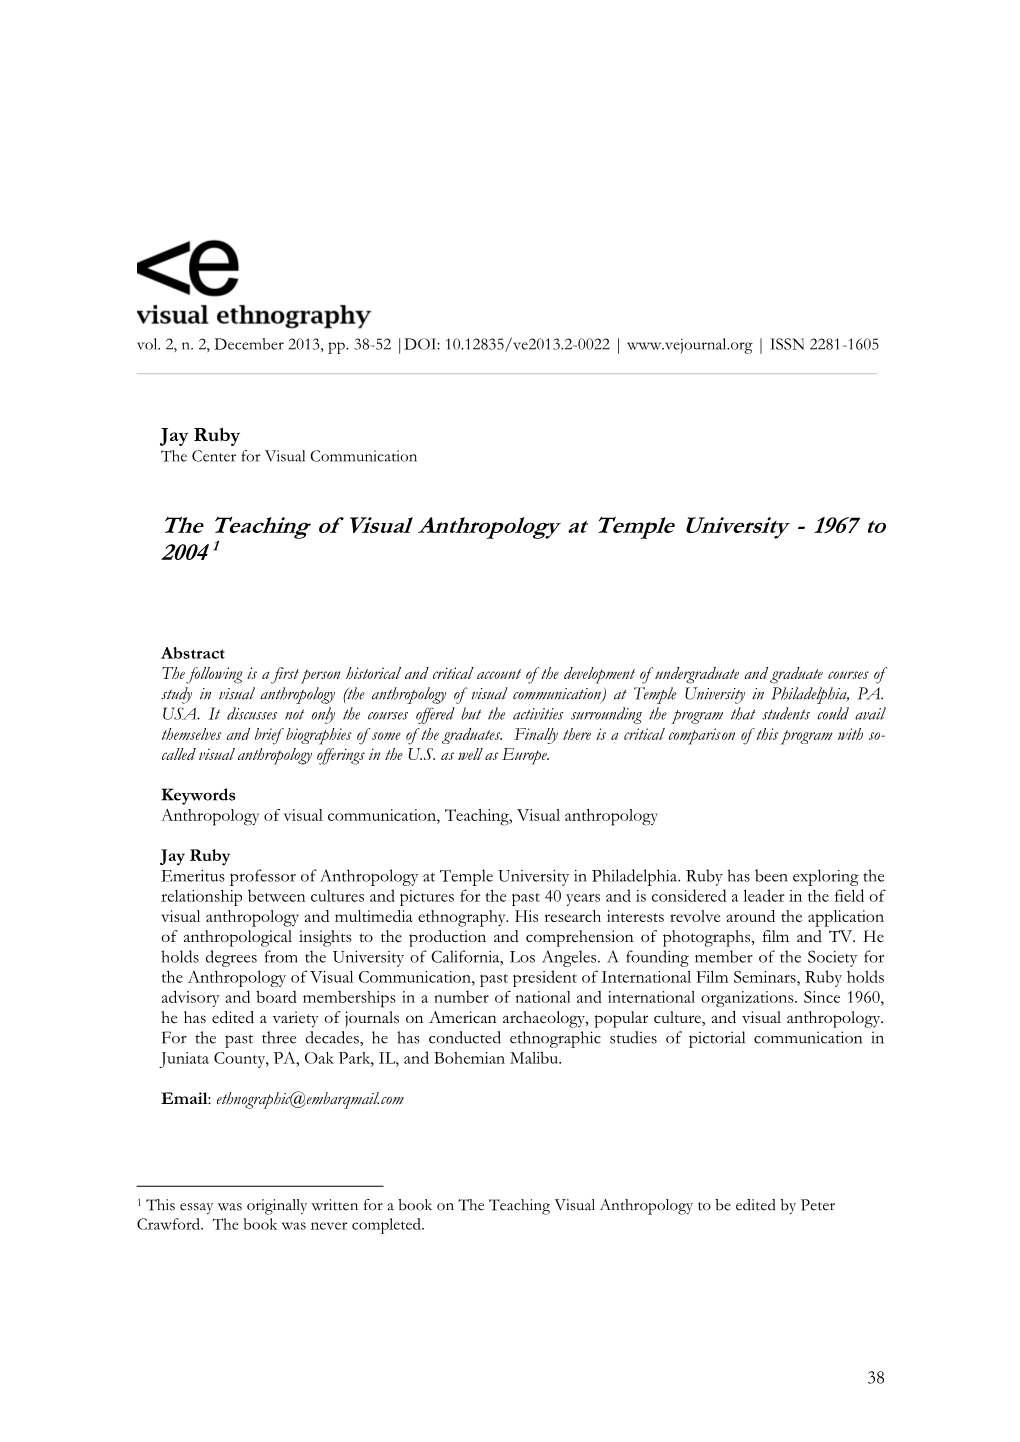 The Teaching of Visual Anthropology at Temple University - 1967 to 2004 1